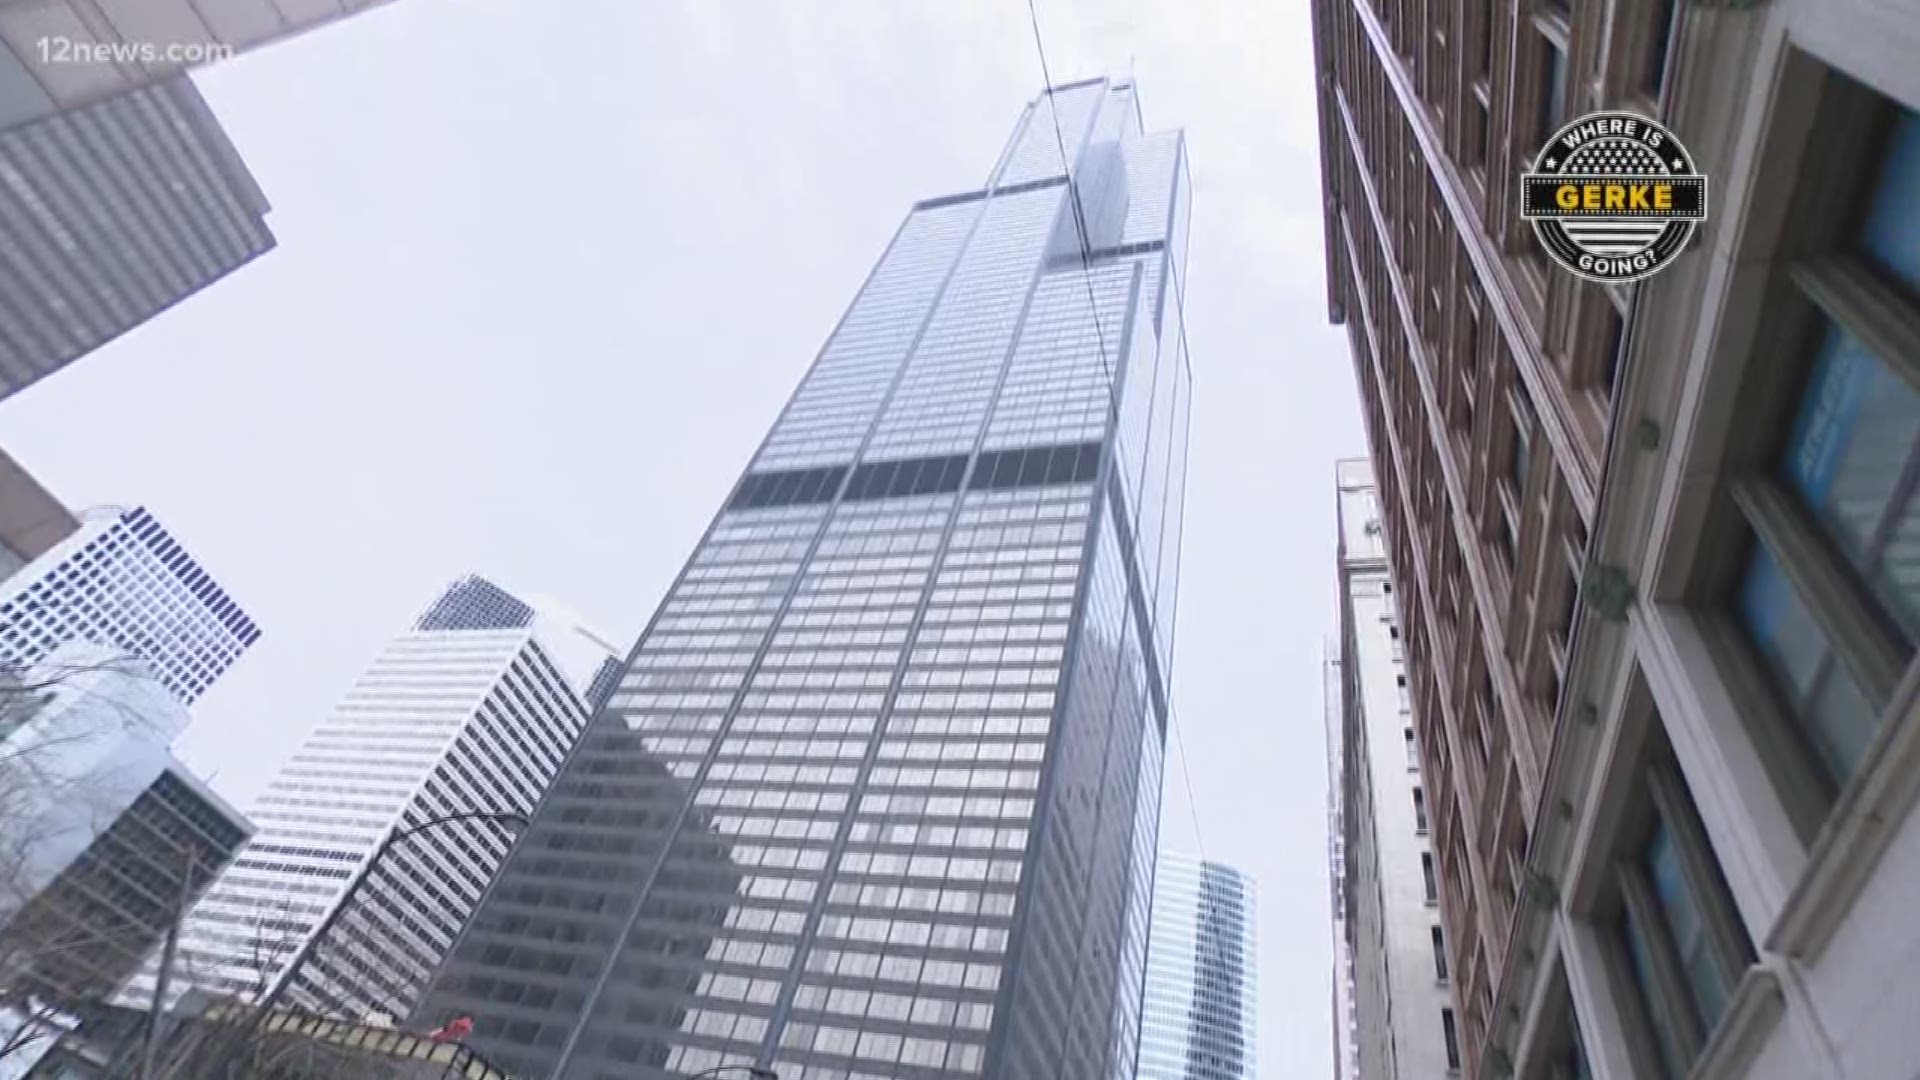 The Willis Tower, formerly known as the Sears Tower, is a 110-story skyscraper that establishes the ceiling of the Chicago Skyline. When it was completed in 1973, it was the tallest building in the world.